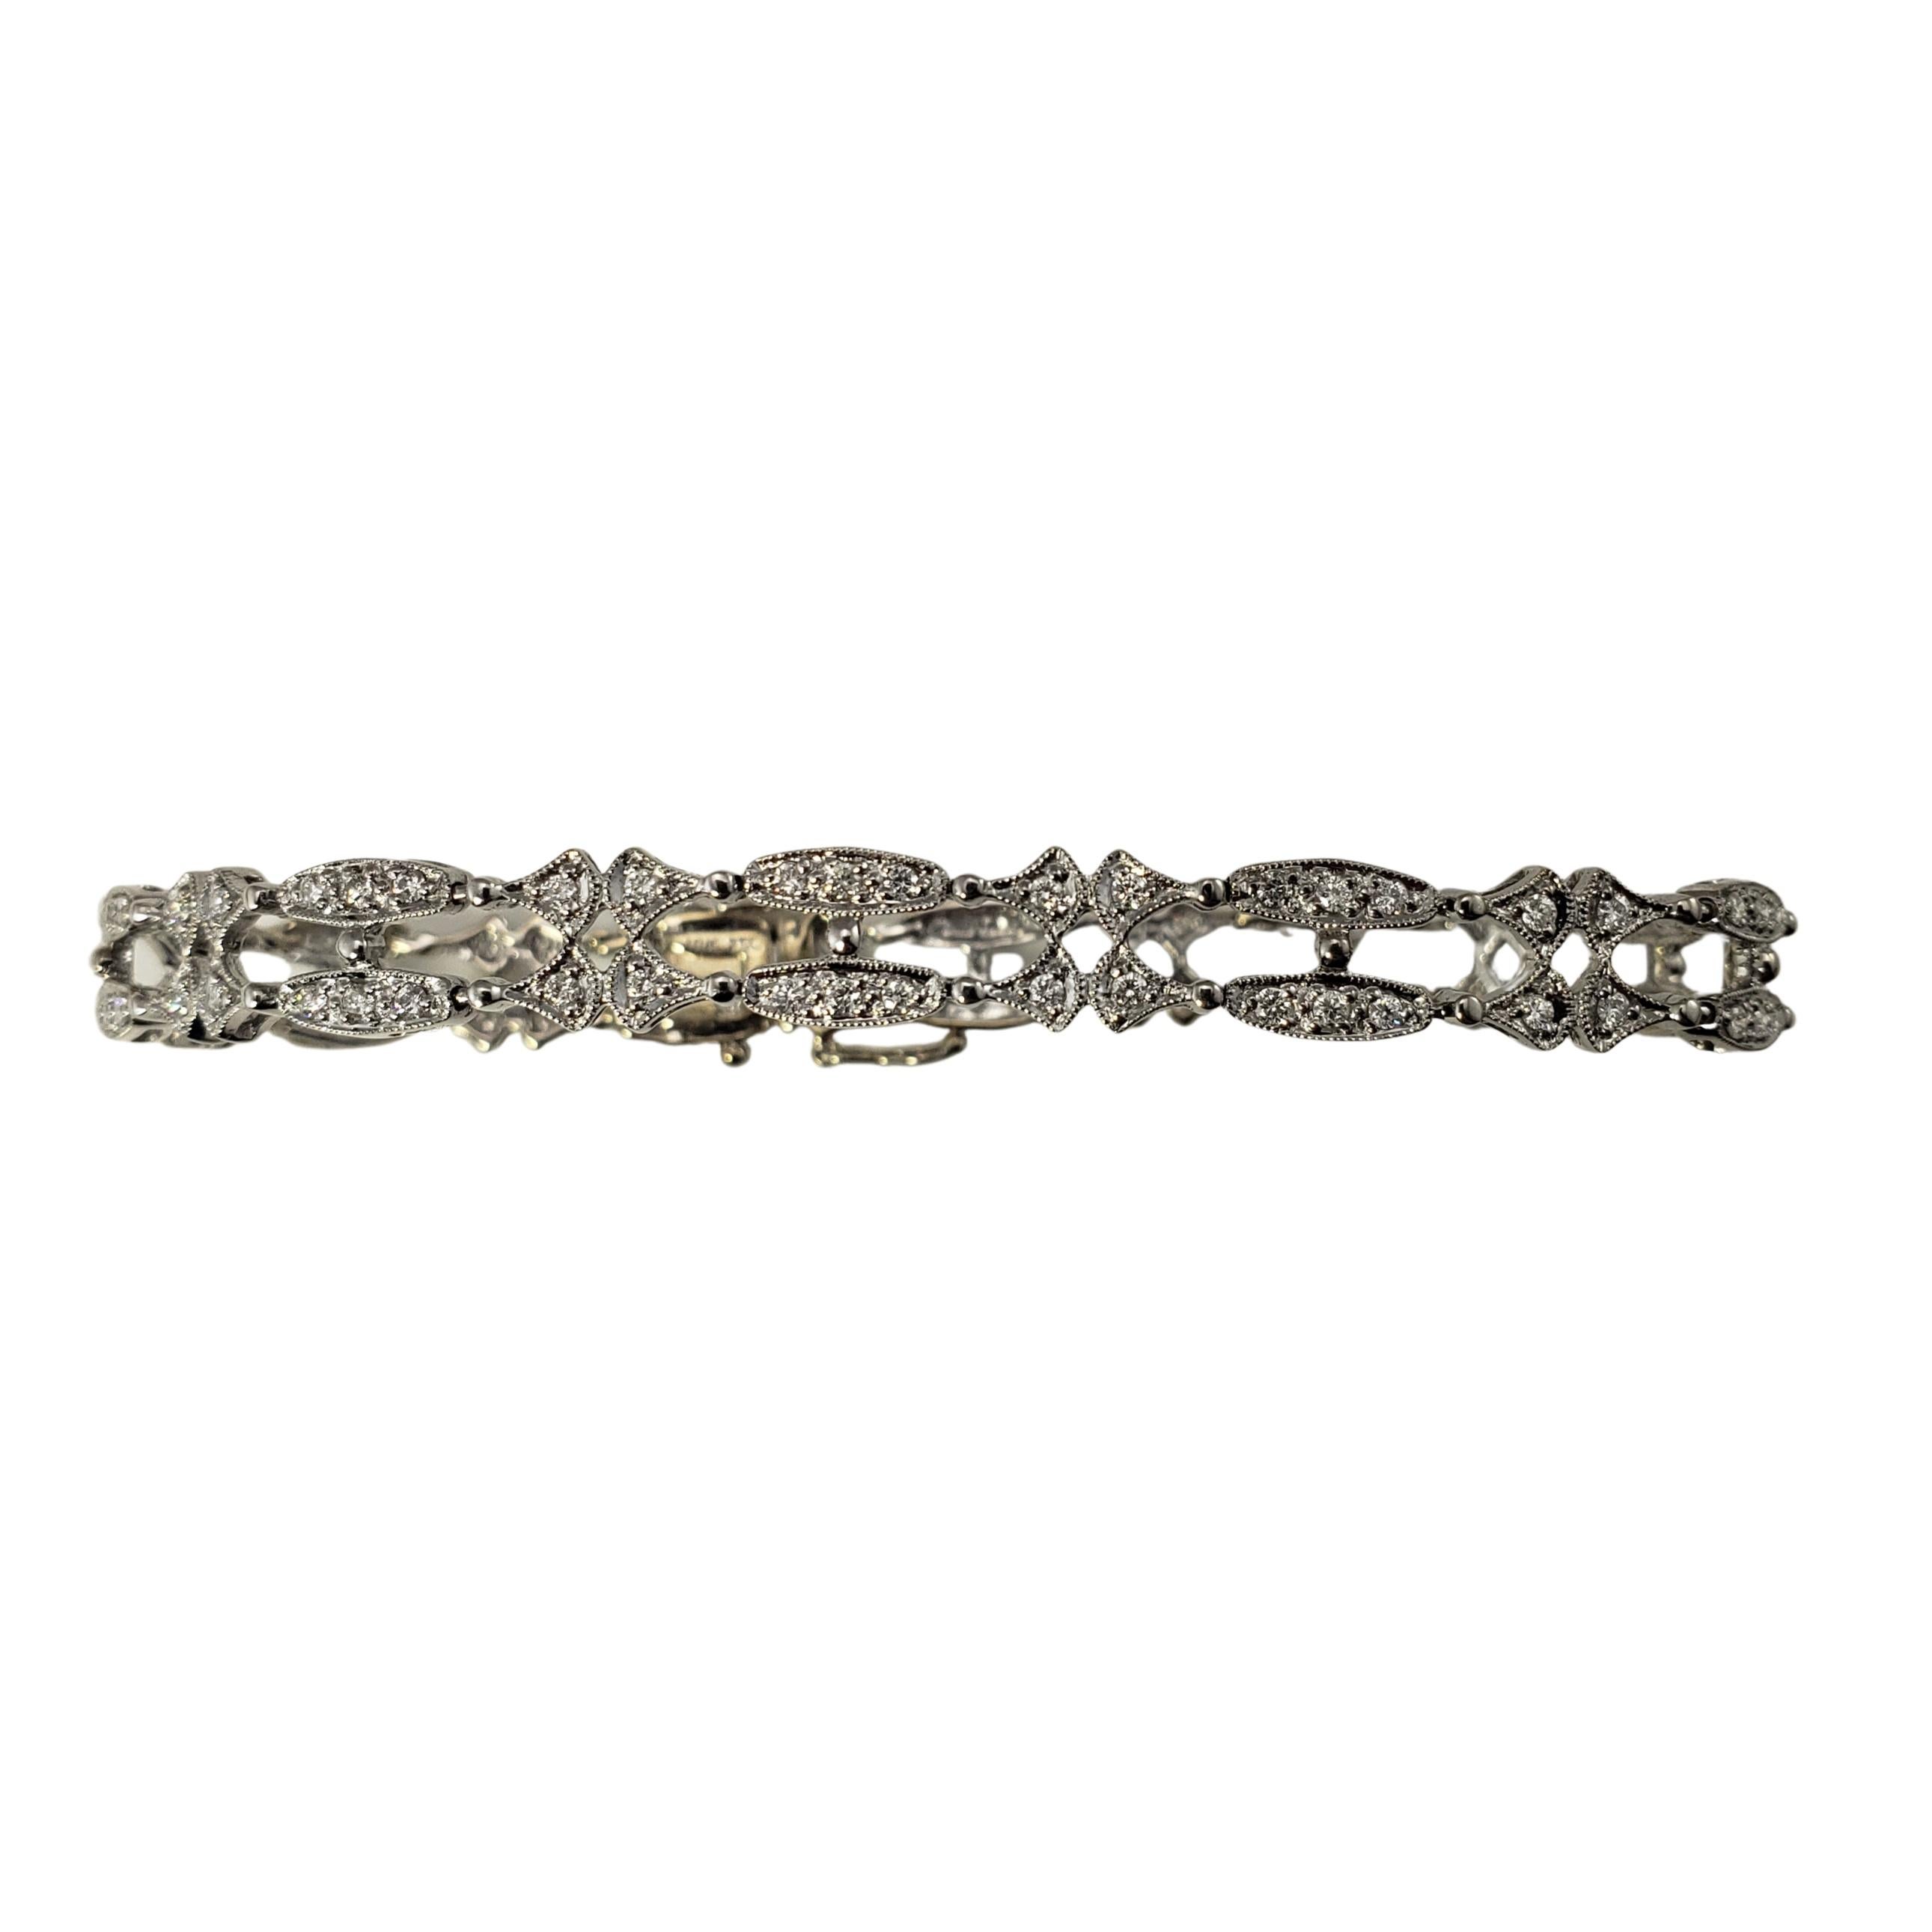 18 Karat White Gold and Diamond Bracelet-

This sparkling bracelet features 100 round brilliant cut diamonds set in beautifully detailed 18K white gold.  Width:  7 mm.

Approximate total diamond weight:  .50 ct.

Diamond color: H-I

Diamond clarity: